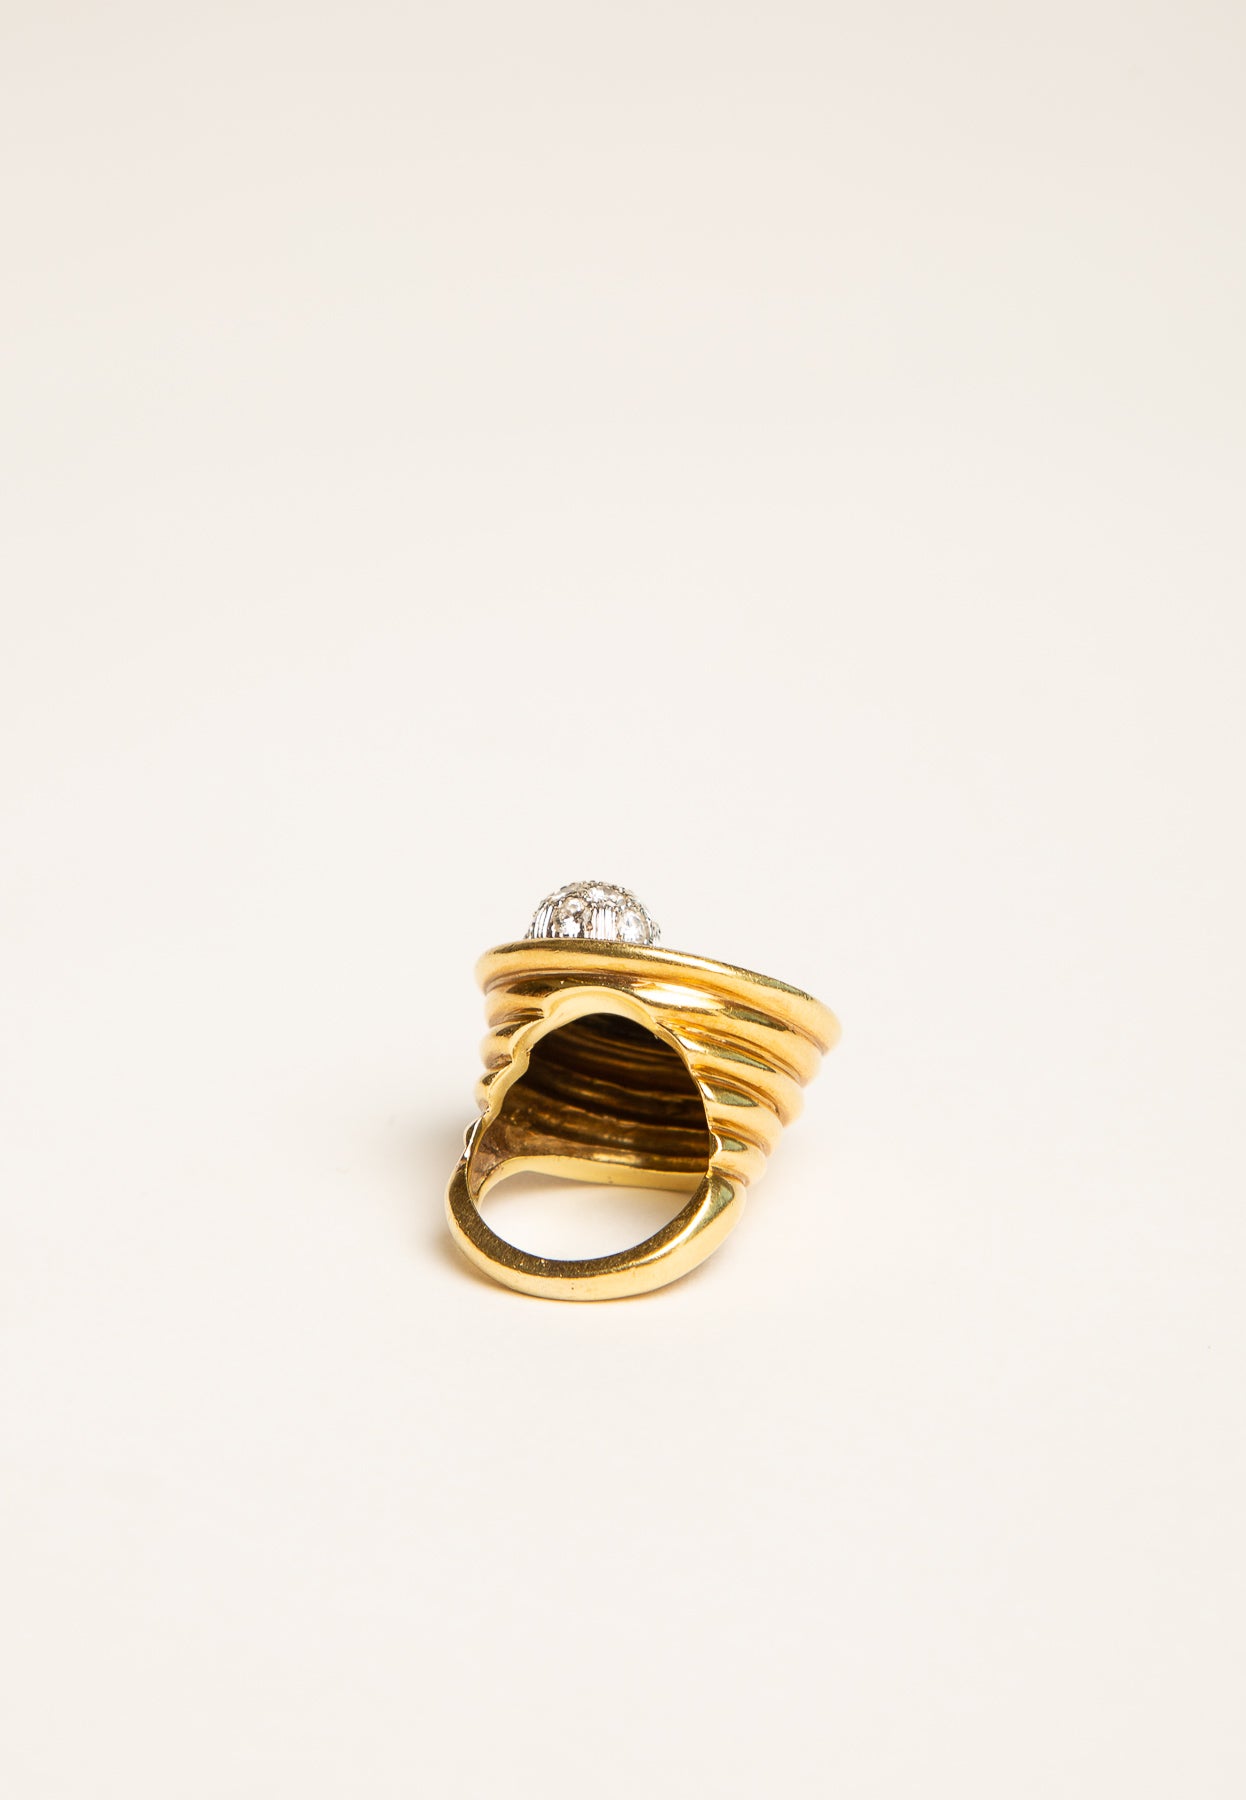 MAXFIELD PRIVATE COLLECTION | 1970'S MODERNIST ONYX RING